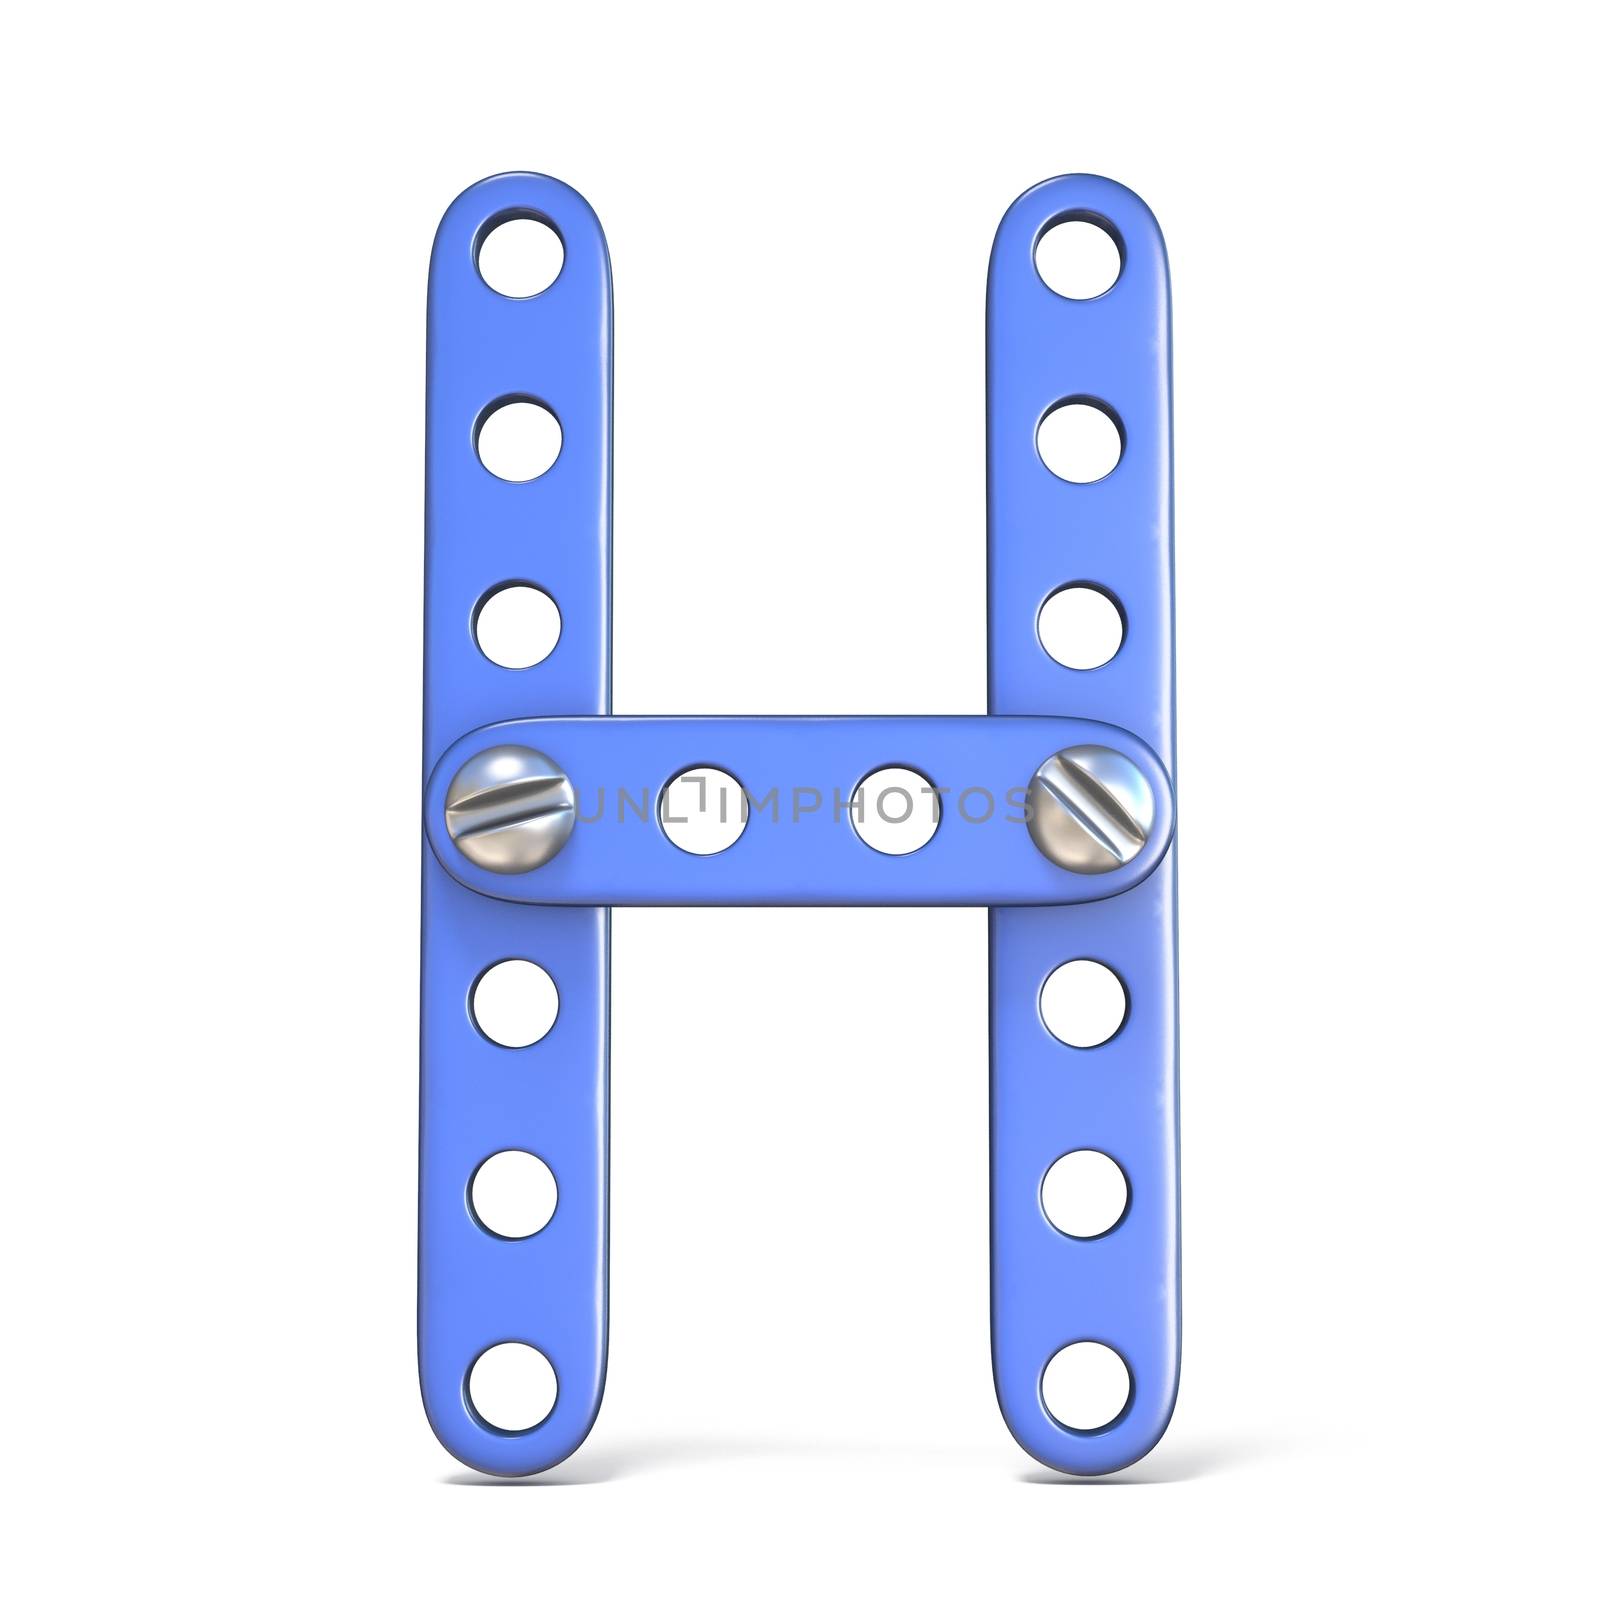 Alphabet made of blue metal constructor toy Letter H 3D render illustration isolated on white background